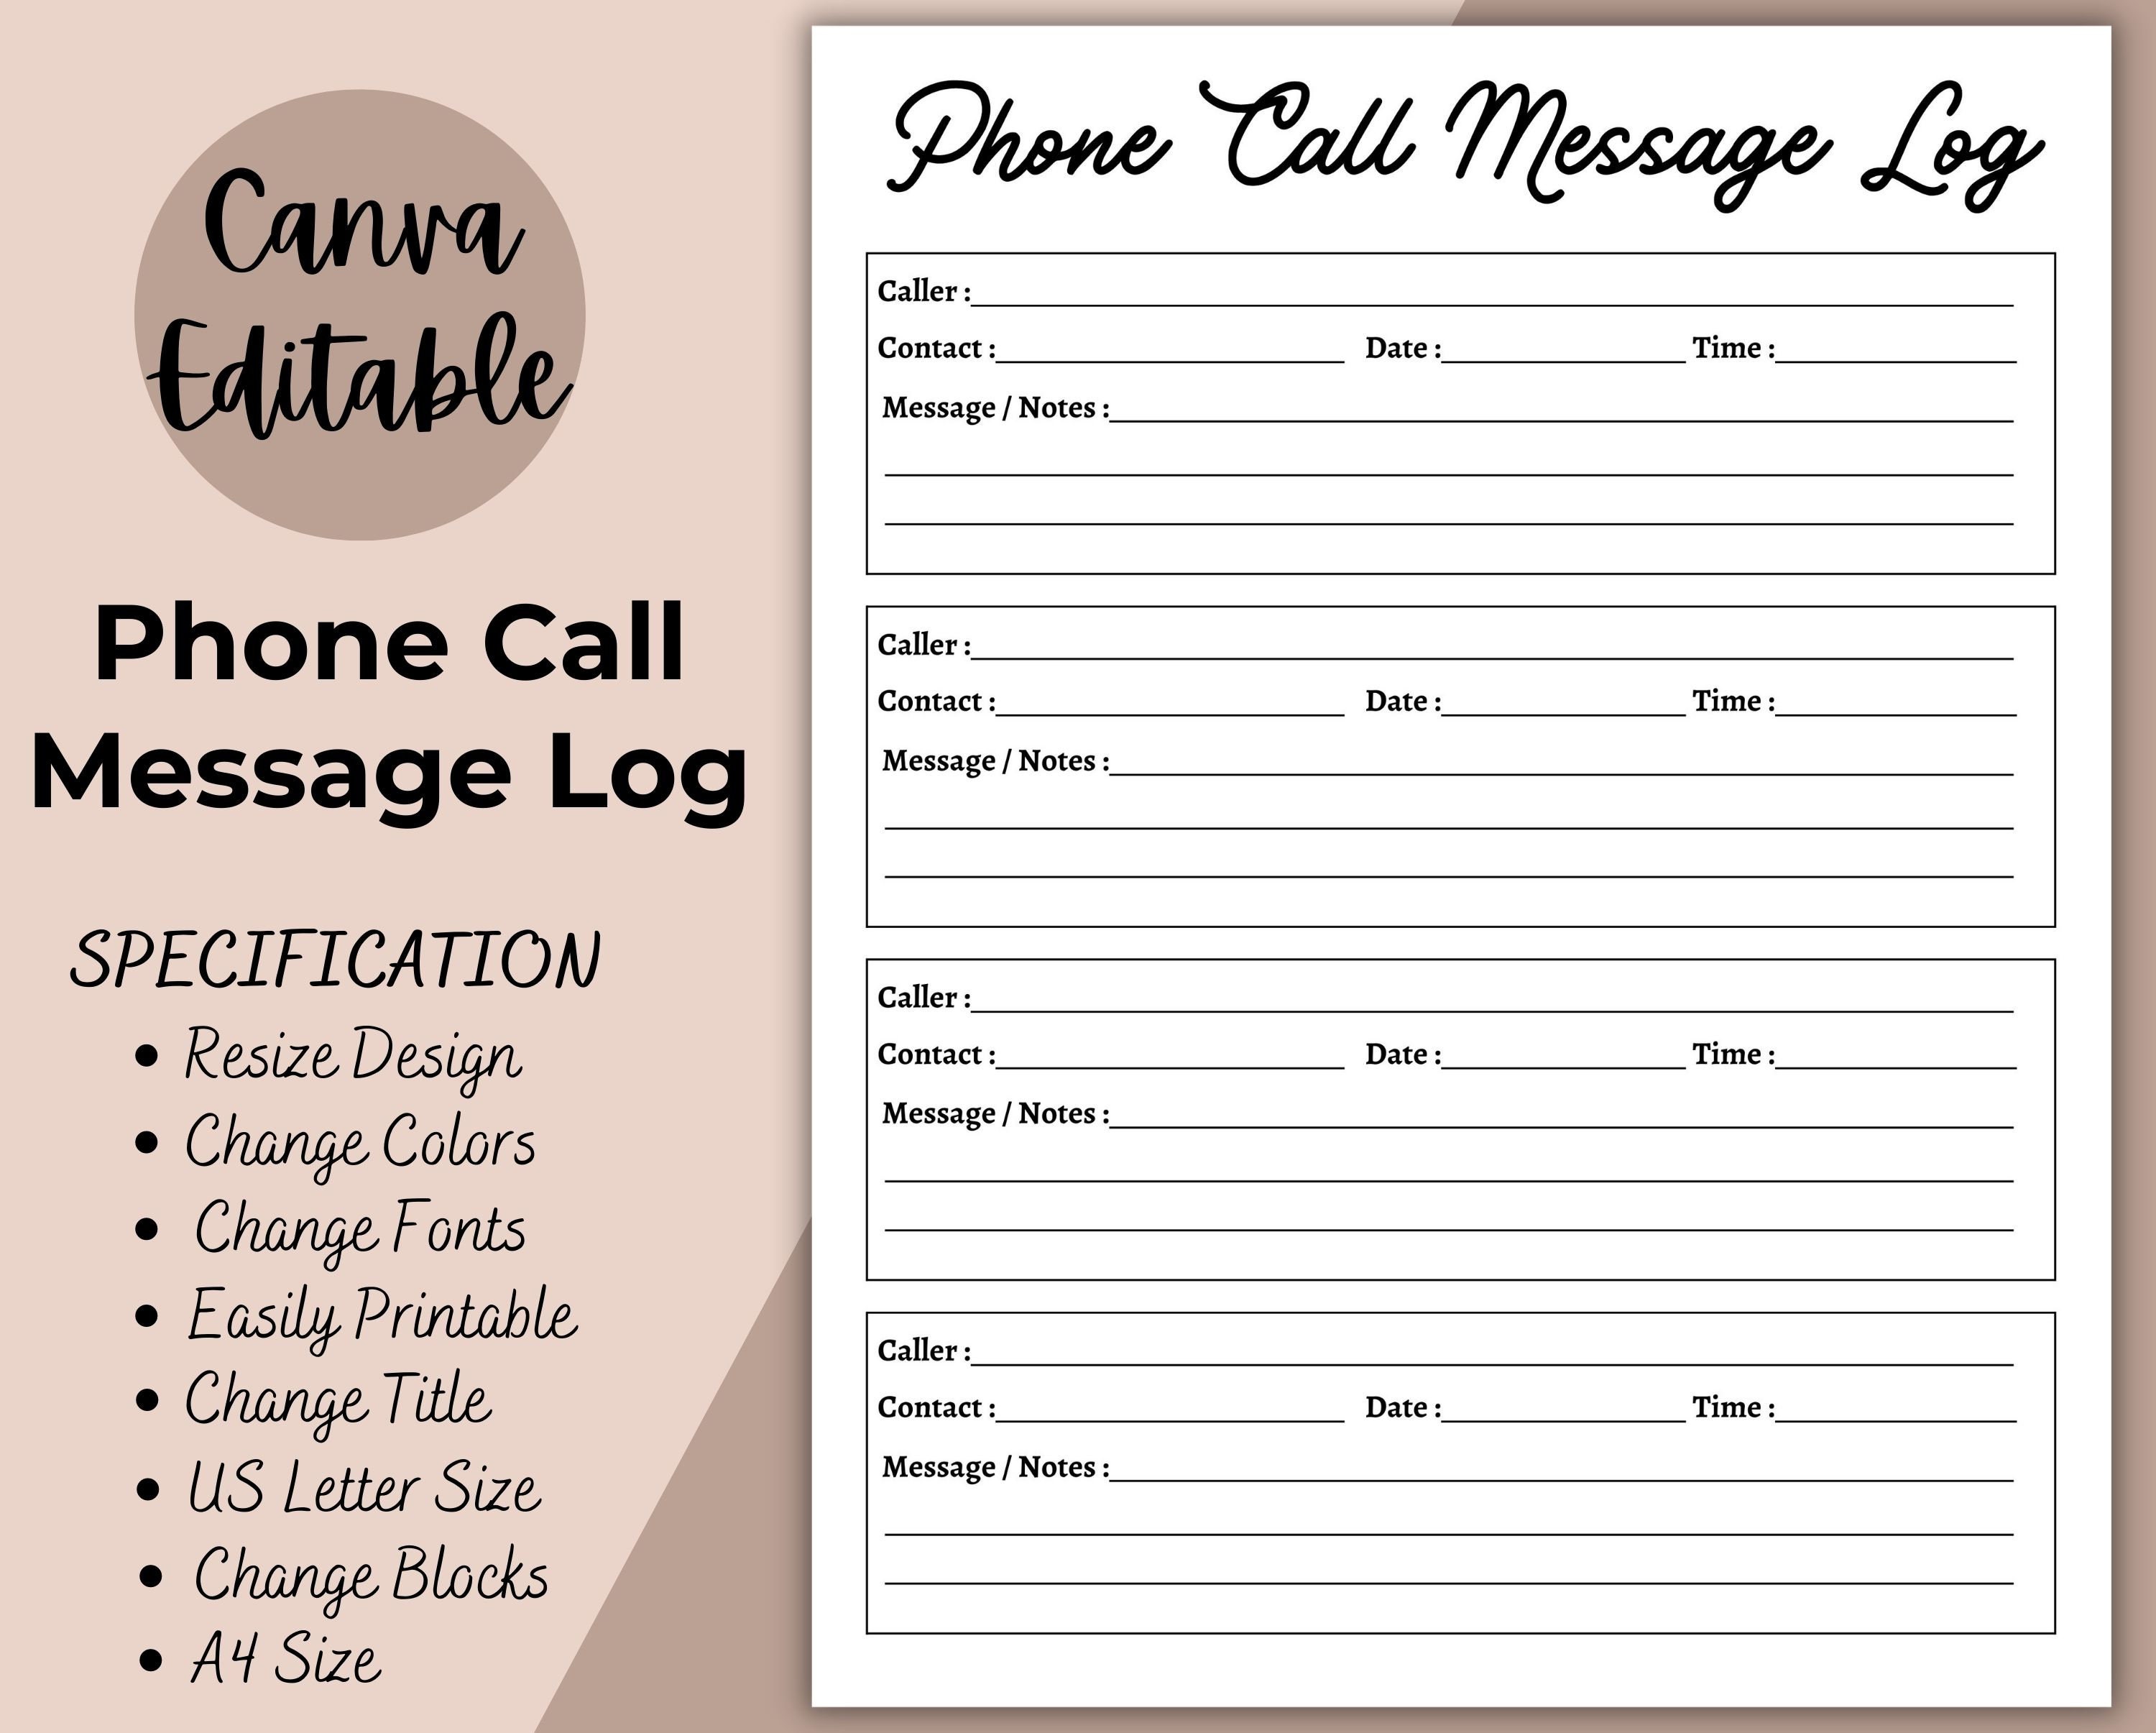 phone-call-message-log-editable-fillable-telephone-template-etsy